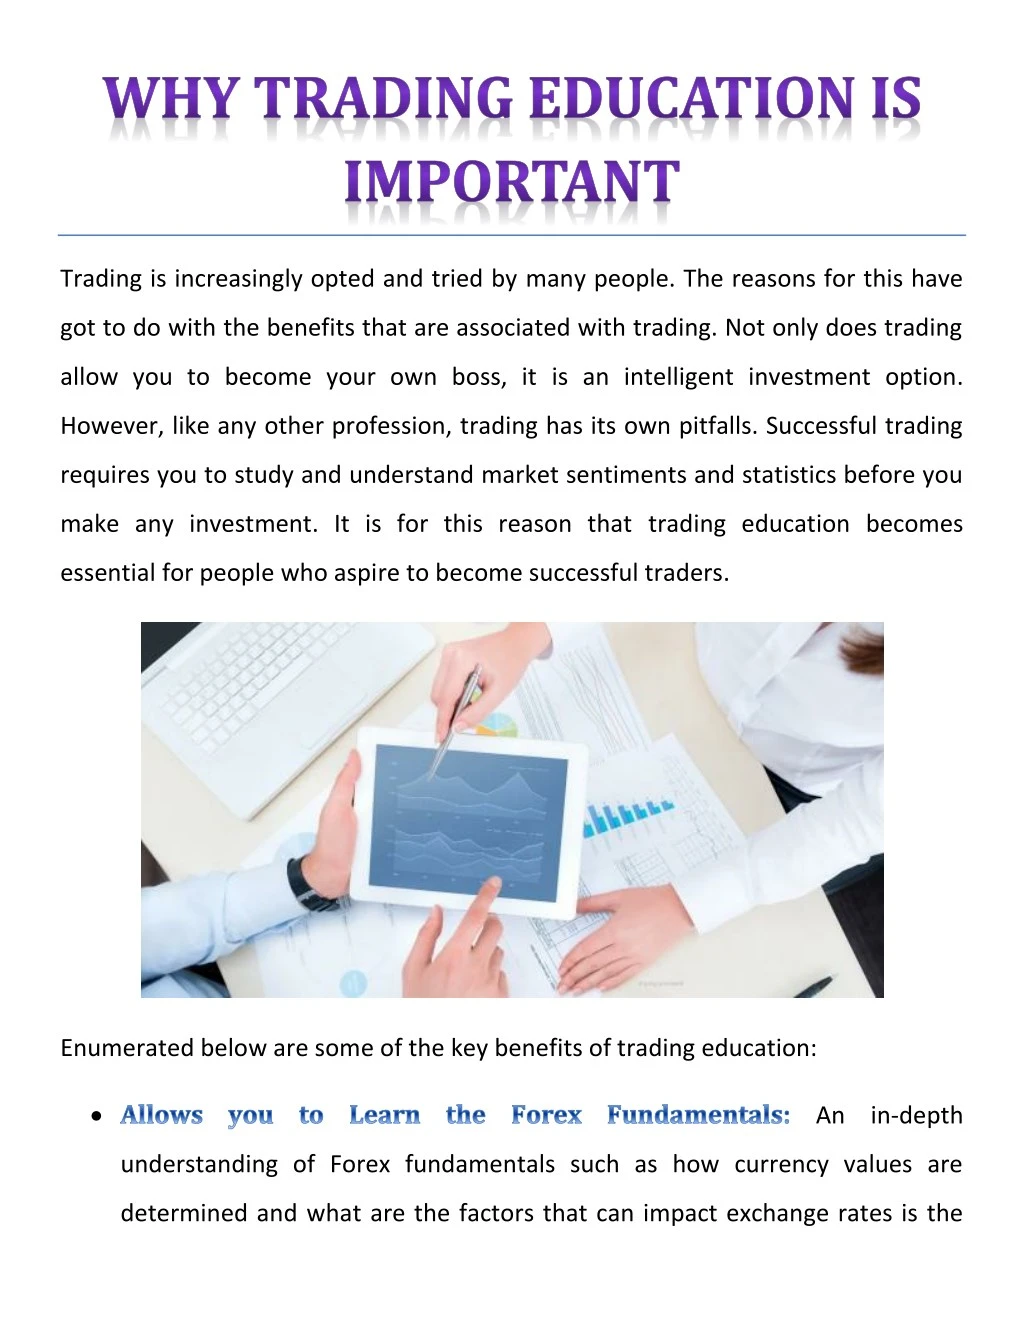 trading is increasingly opted and tried by many